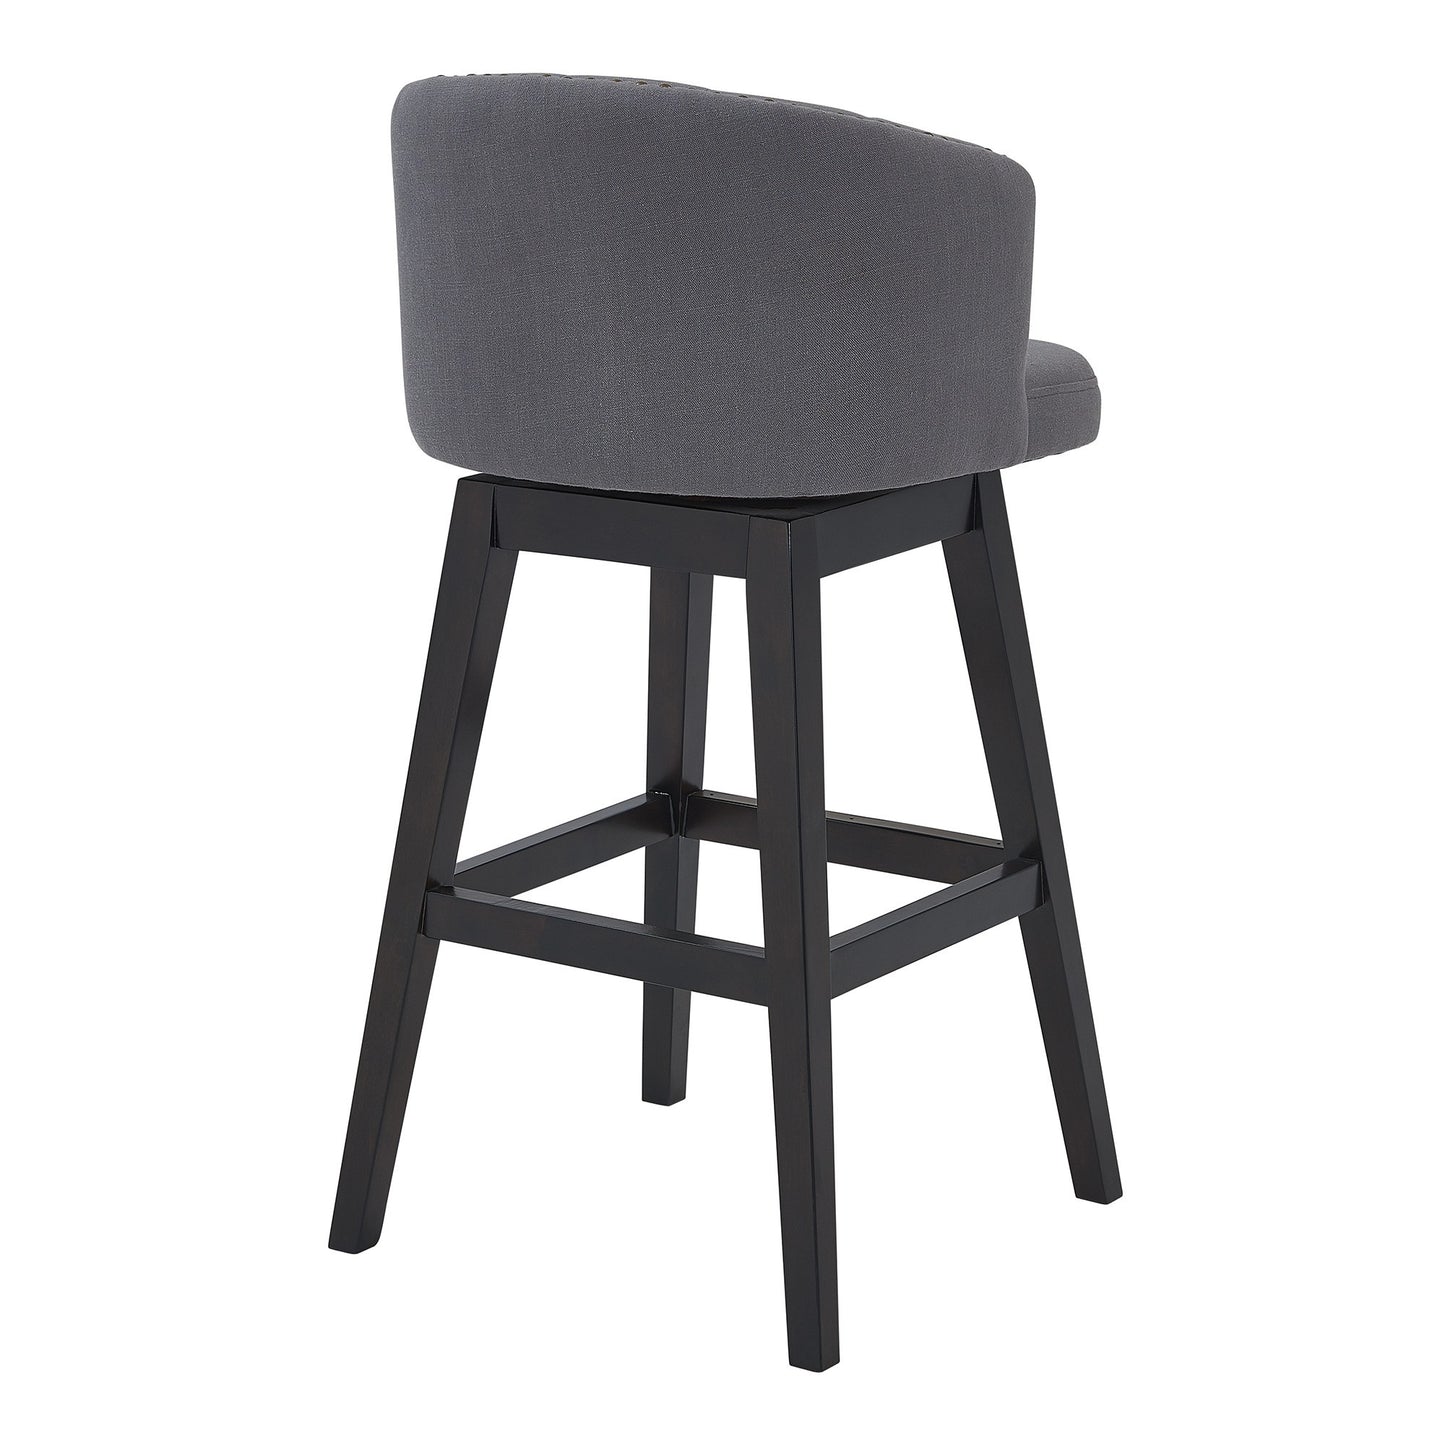 26 Inches Button Tufted Fabric Padded Swivel Counter Stool